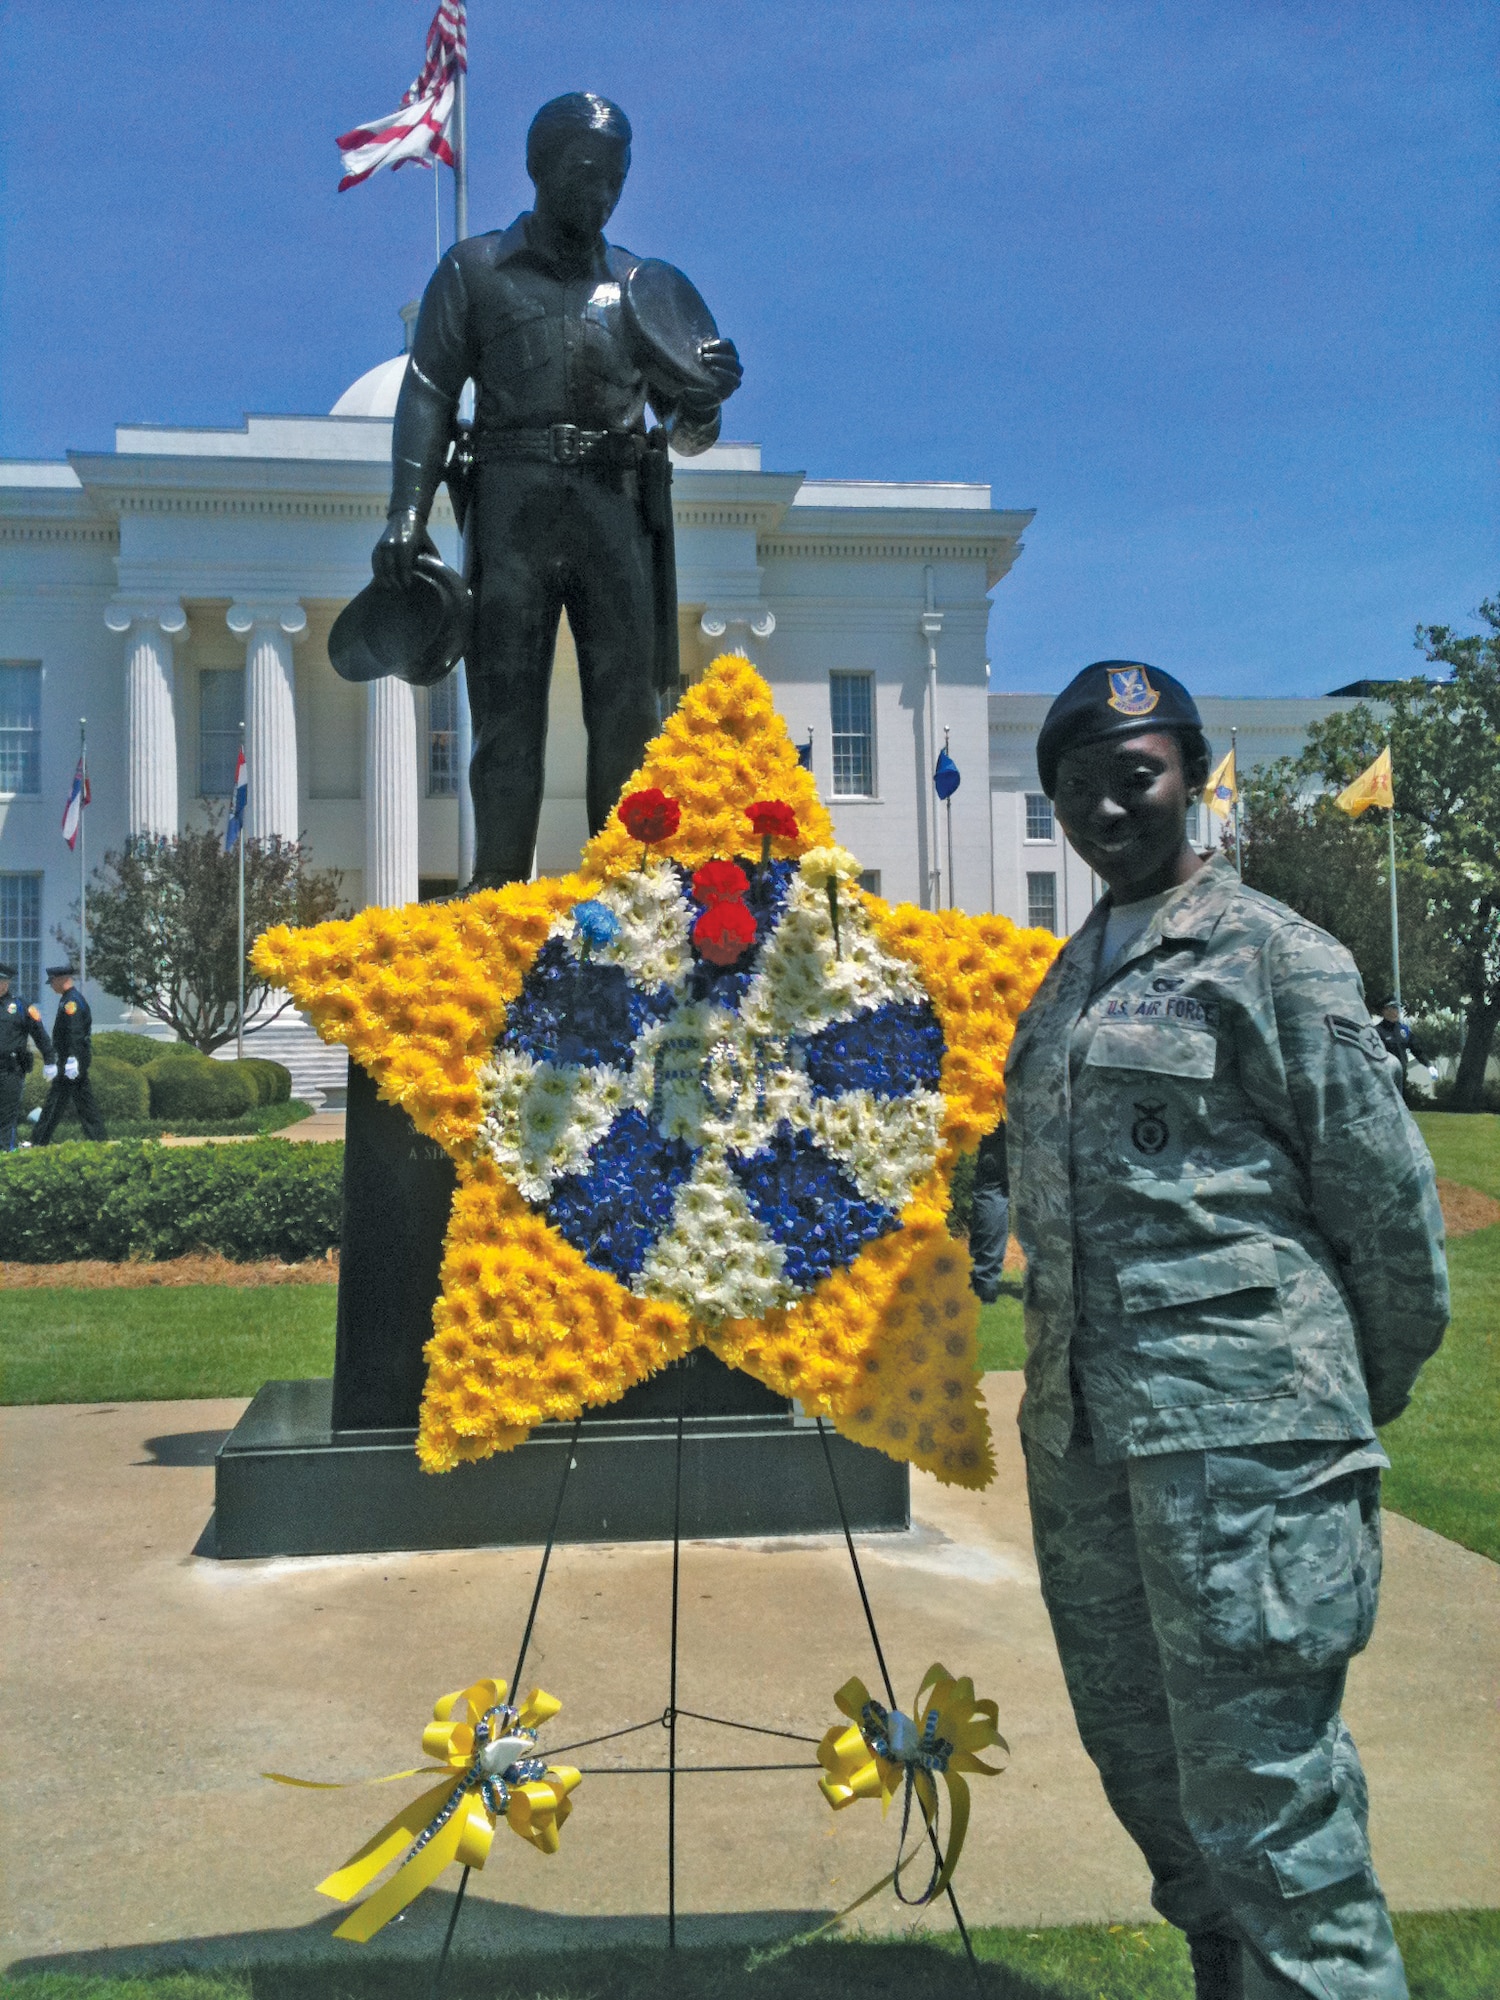 The State of Alabama held a memorial in honor of those who sacrificed their lives to protect the public May 11, 2012, at the state capitol. Representing the military from local Maxwell Air Force Base, security forces troop Airman 1st Class Faren Douglas stands at by a flower star at a memorial service hosted by Fraternal Order of Police at the Alabama state capitol. (US Air Force photos/Tech. Sgt. William Powell)